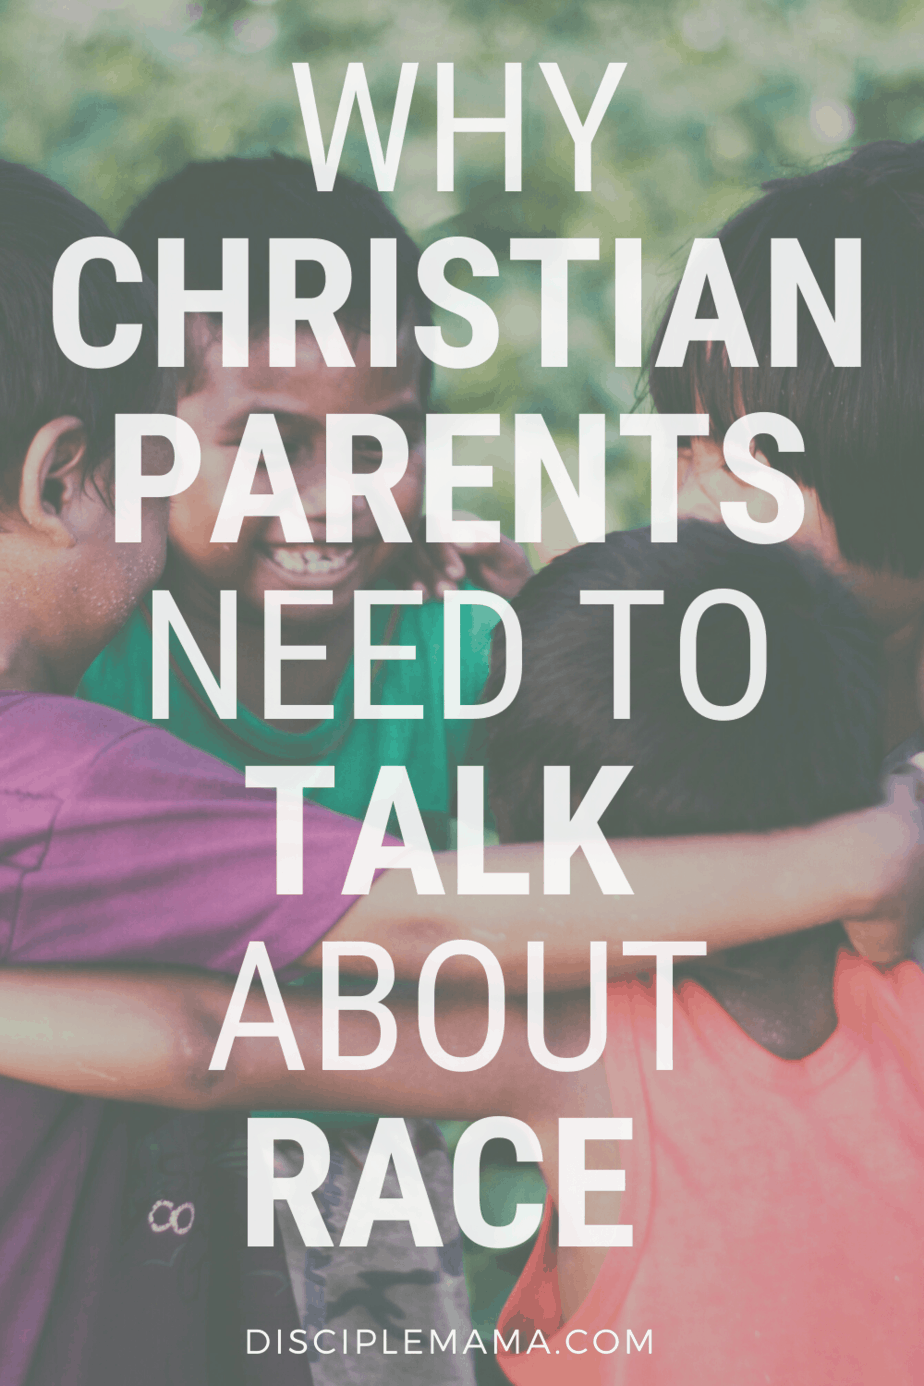 Why Christian Parents Need to Talk About Race